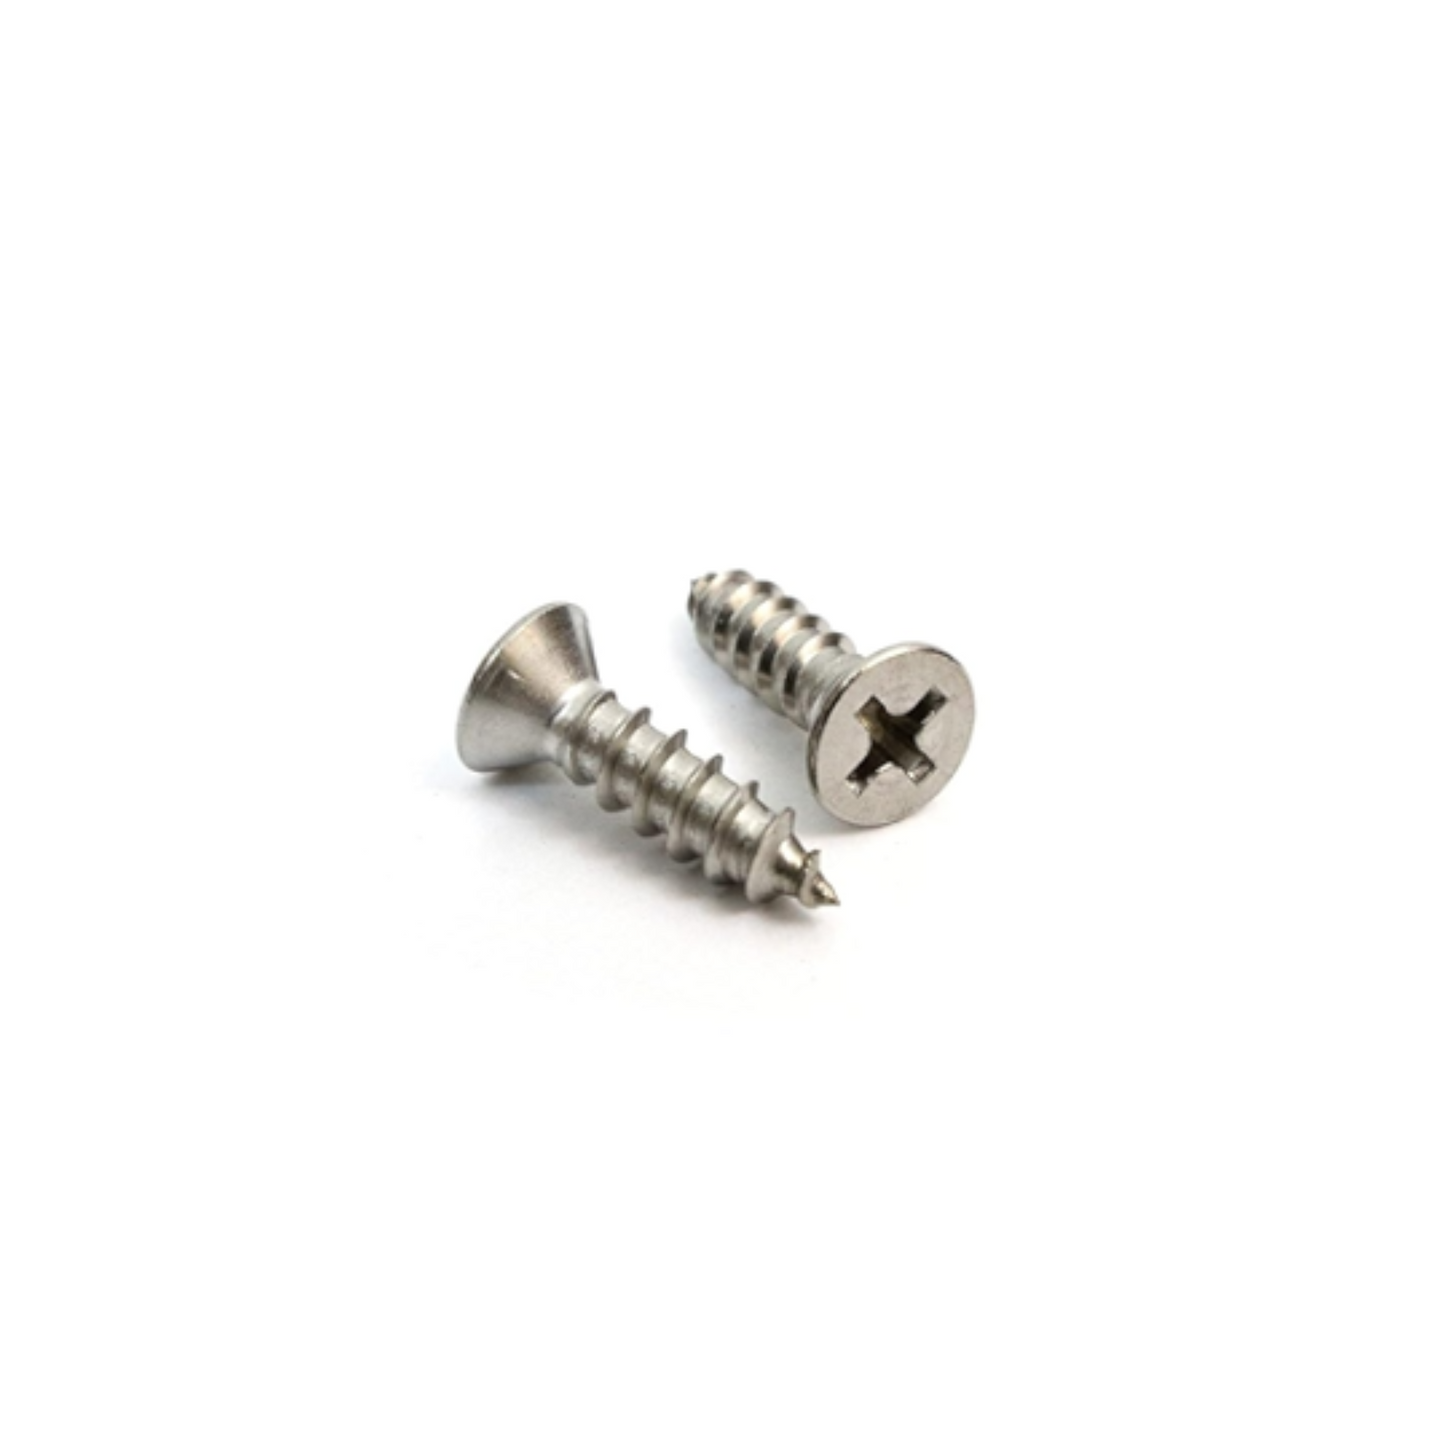 No.10(4.8mm) X 25mm Phillips CSK SS 304 Self Tapping Wood Screw